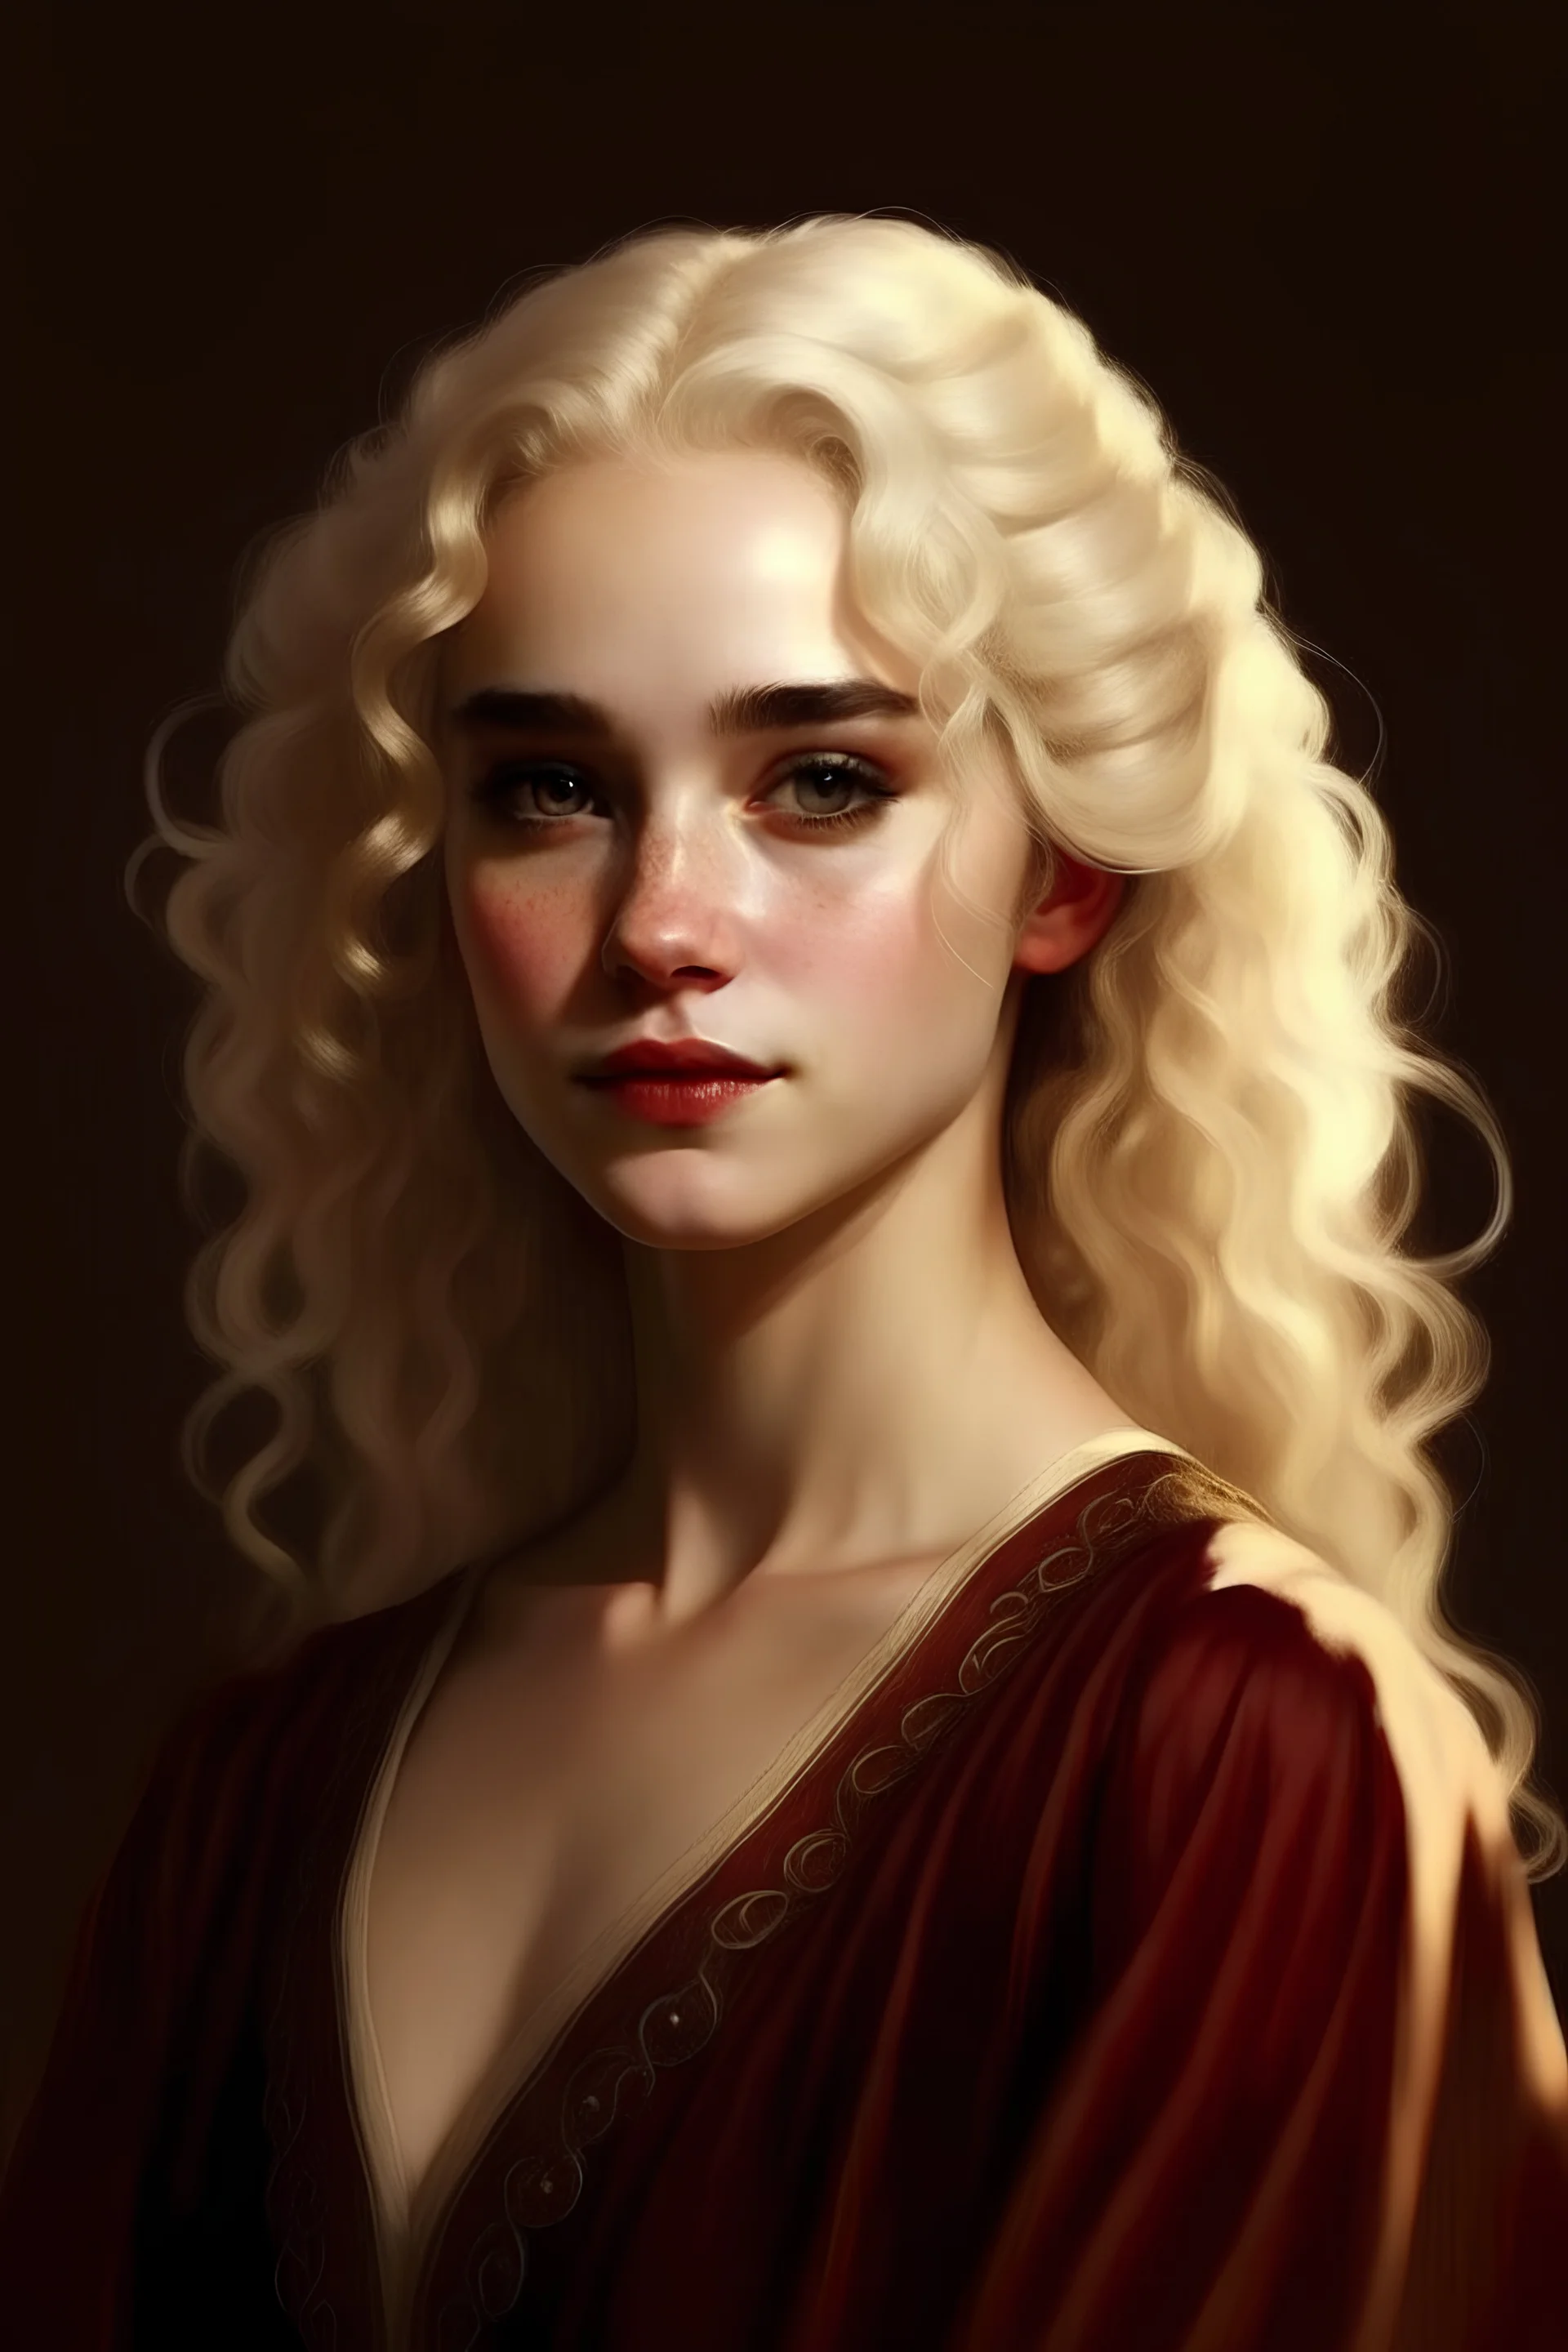 Maegelle Targaryen, aged 21, epitomizes Targaryen allure with her cropped golden curls and sapphire eyes. Despite her royal lineage, her demeanor exudes youthful innocence and curiosity. her porcelain skin and high cheekbones.